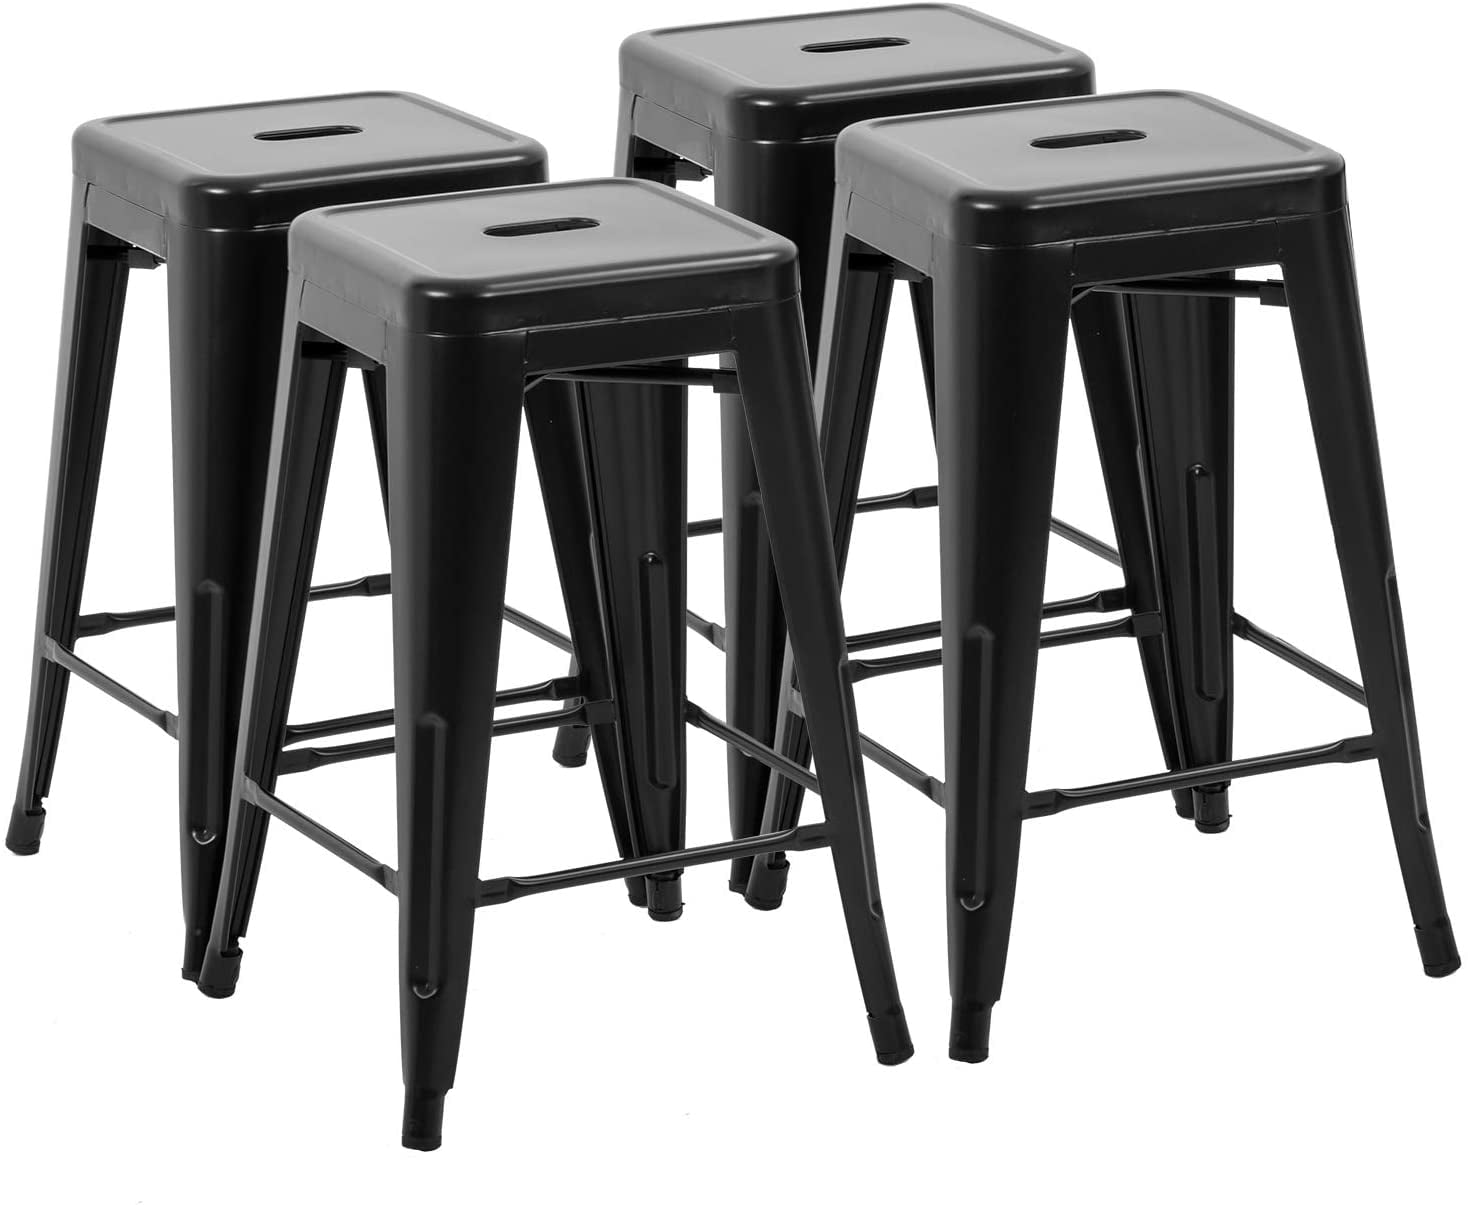 Bonzy Home Metal Bar Stools 30 Inch Counter Height Stackable Barstools Indoor Outdoor Patio Furniture Dining Backless Kitchen Bar Stools Set of 4 